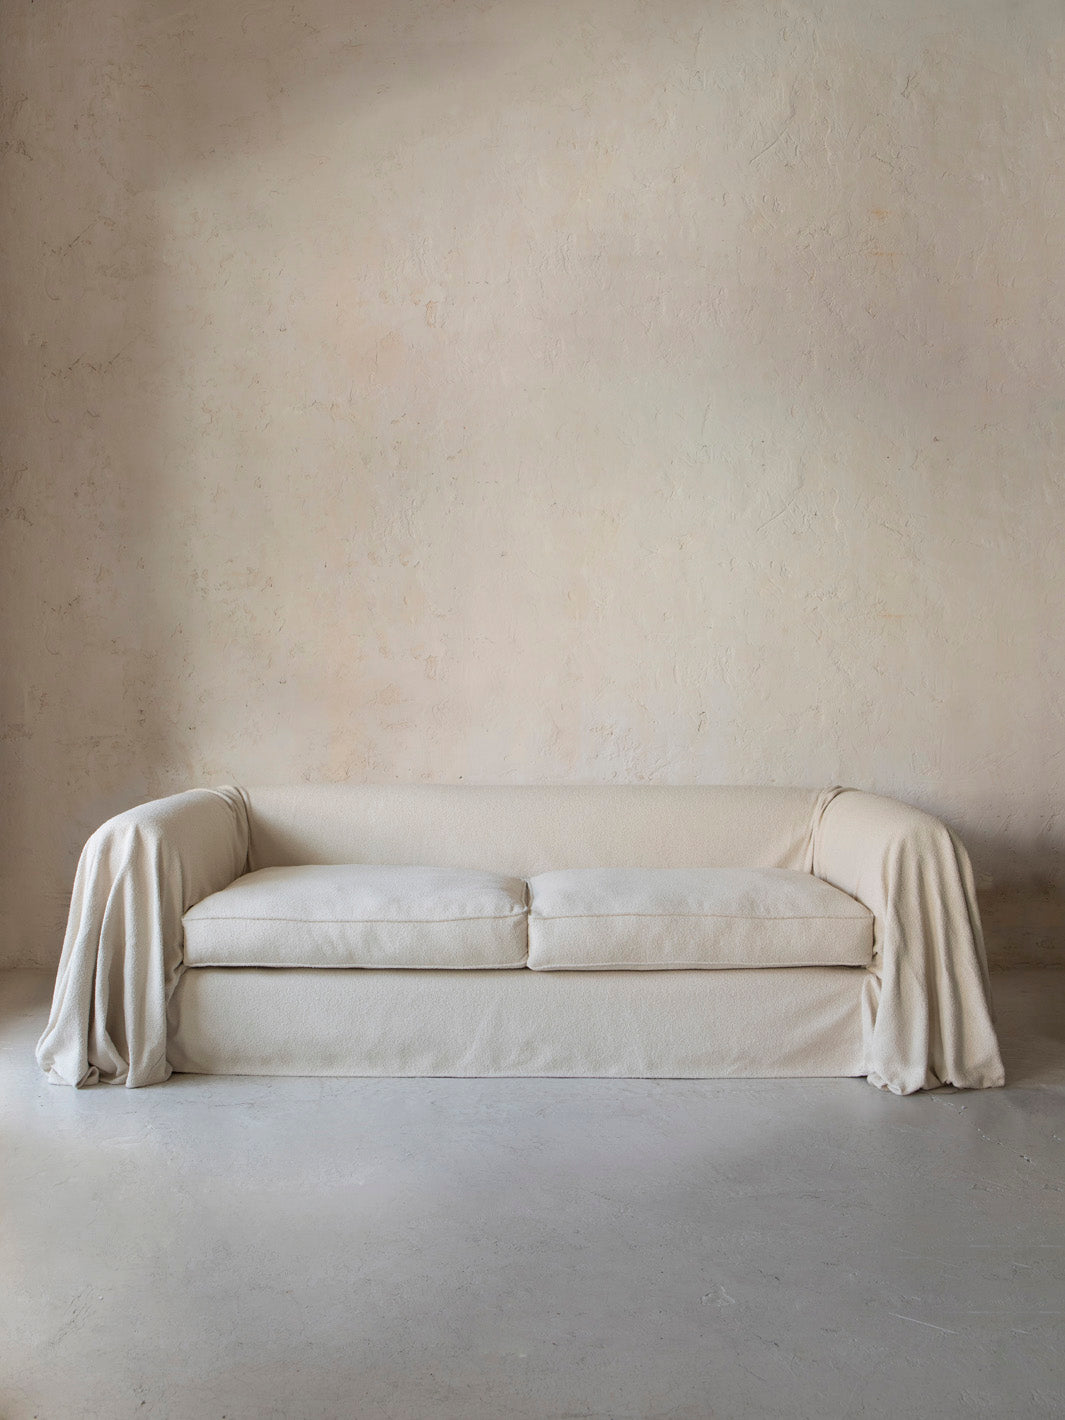 Chester Linen sofa in knotted weave